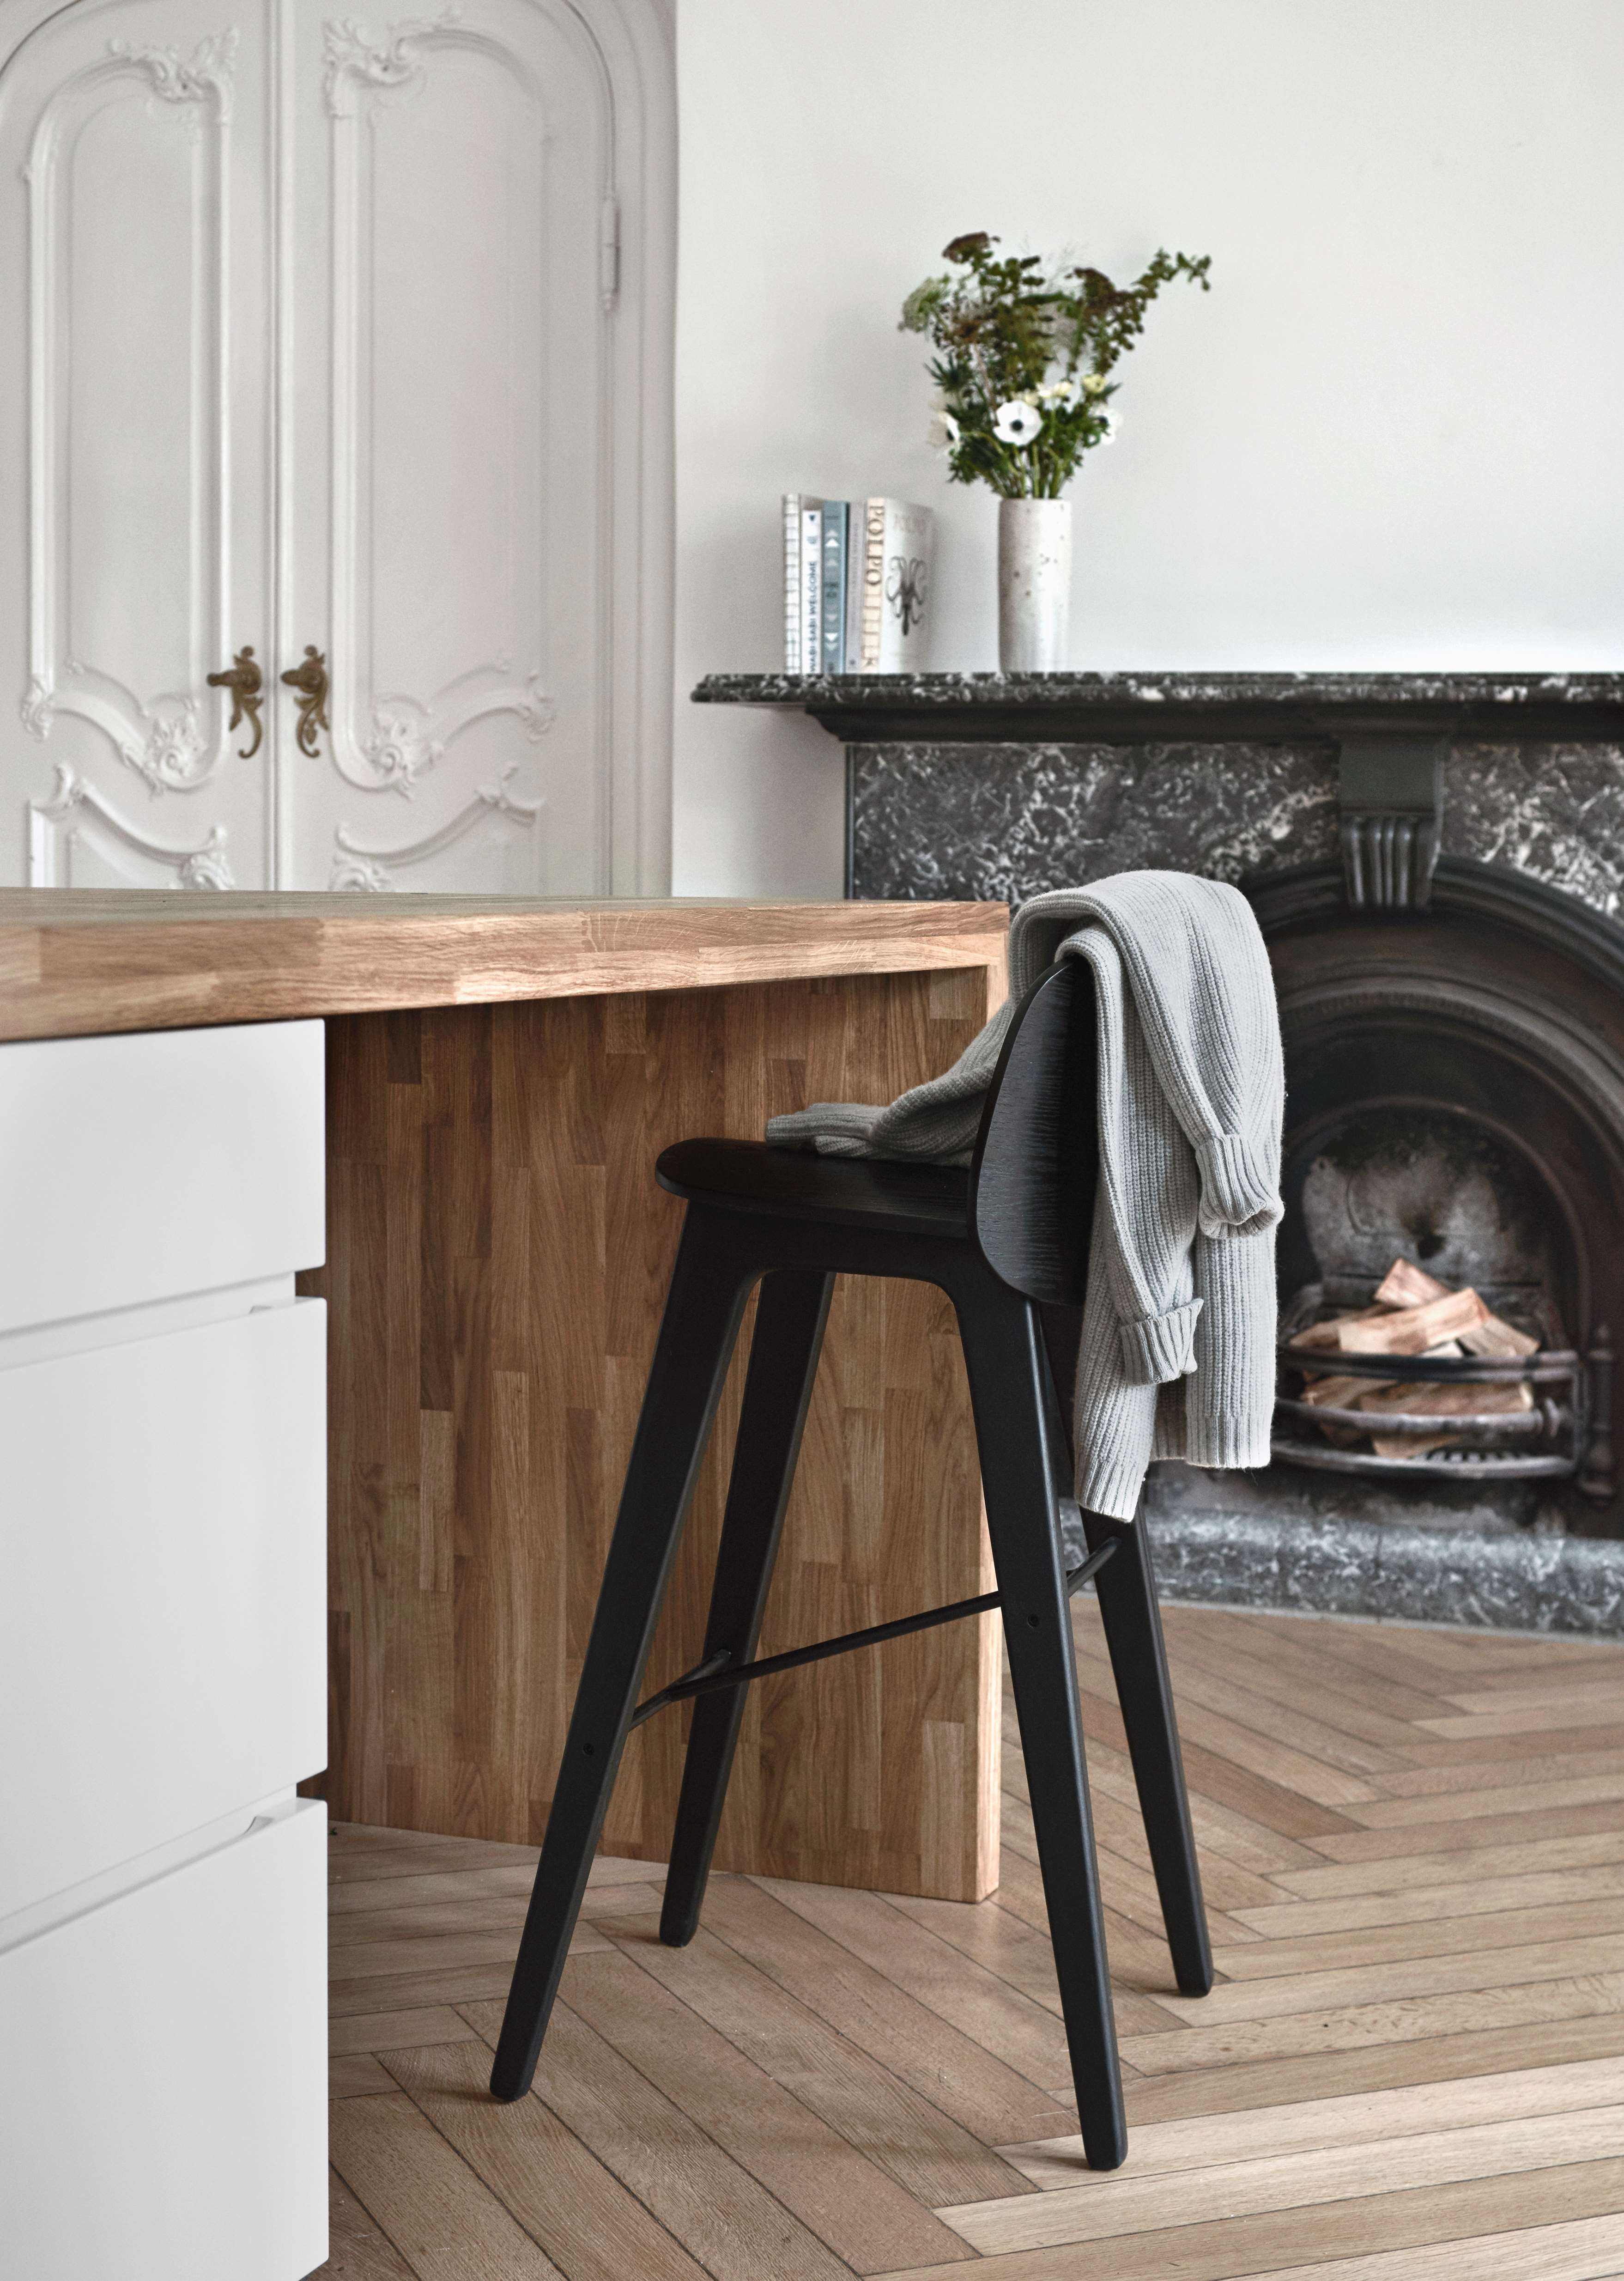 Create a cozy kitchen with bar stools for your kitchen island